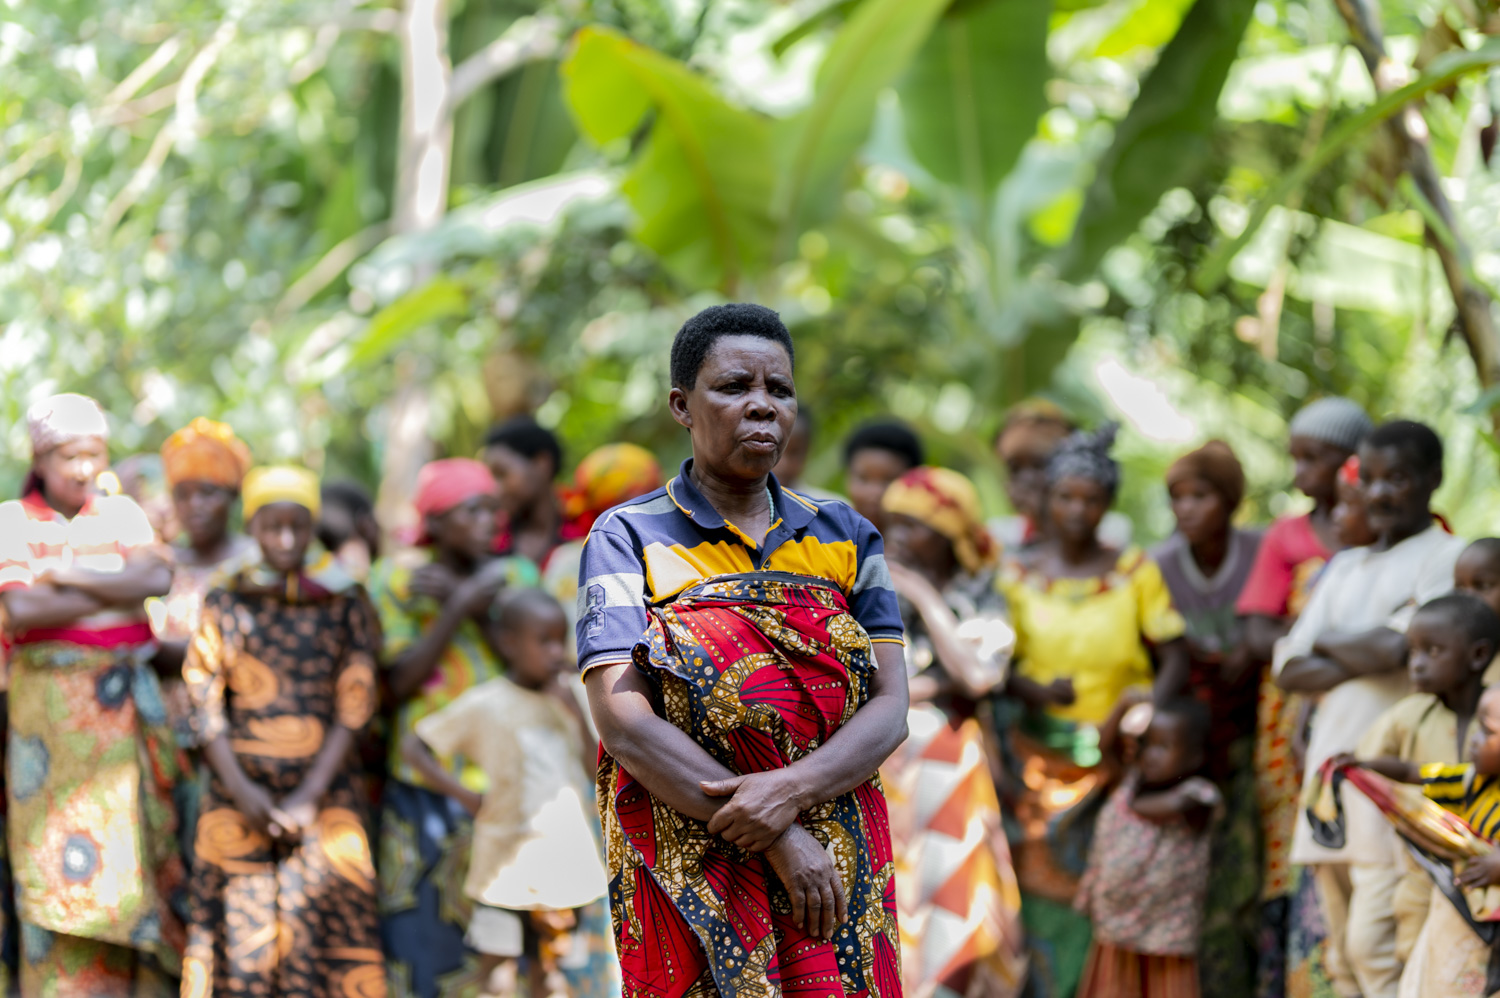 In Burundi, women mediators foster peace and well-being for all